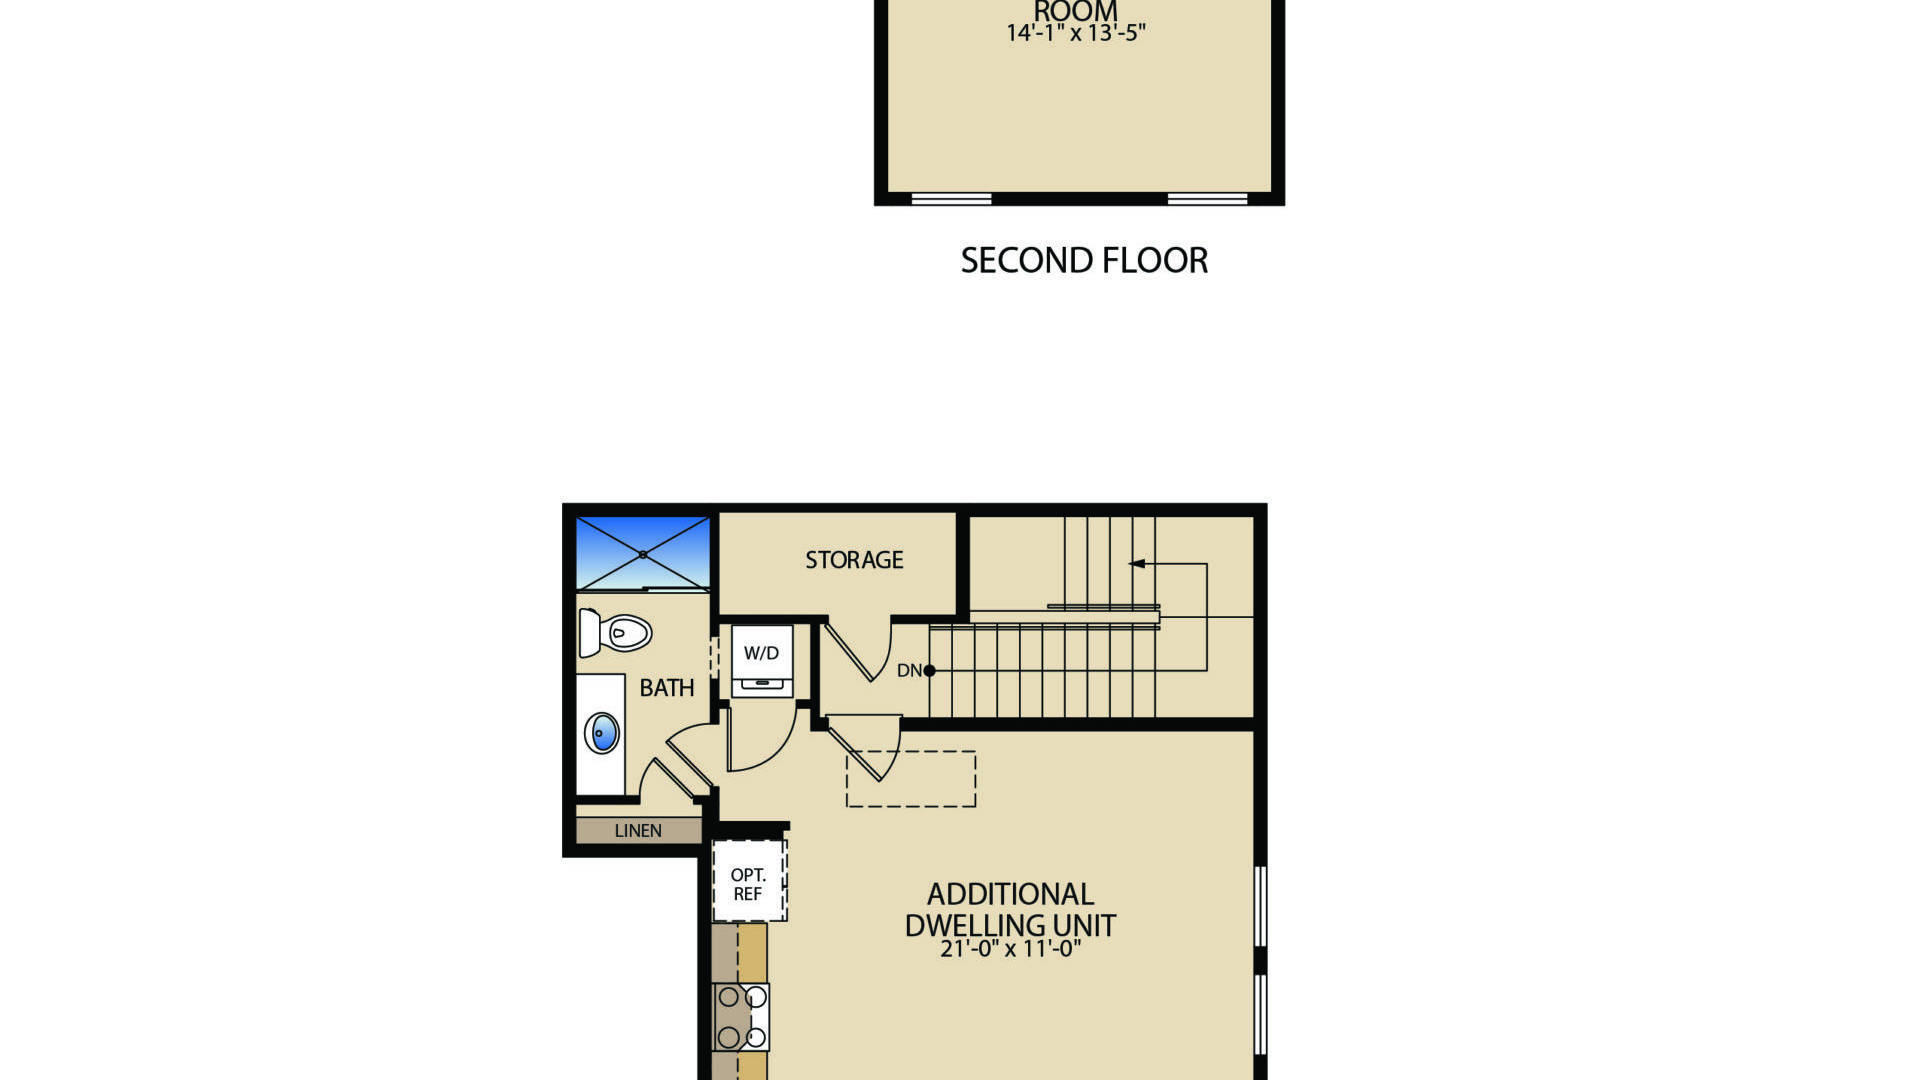 The Piazza II Second Floor Plan With Optional ADU